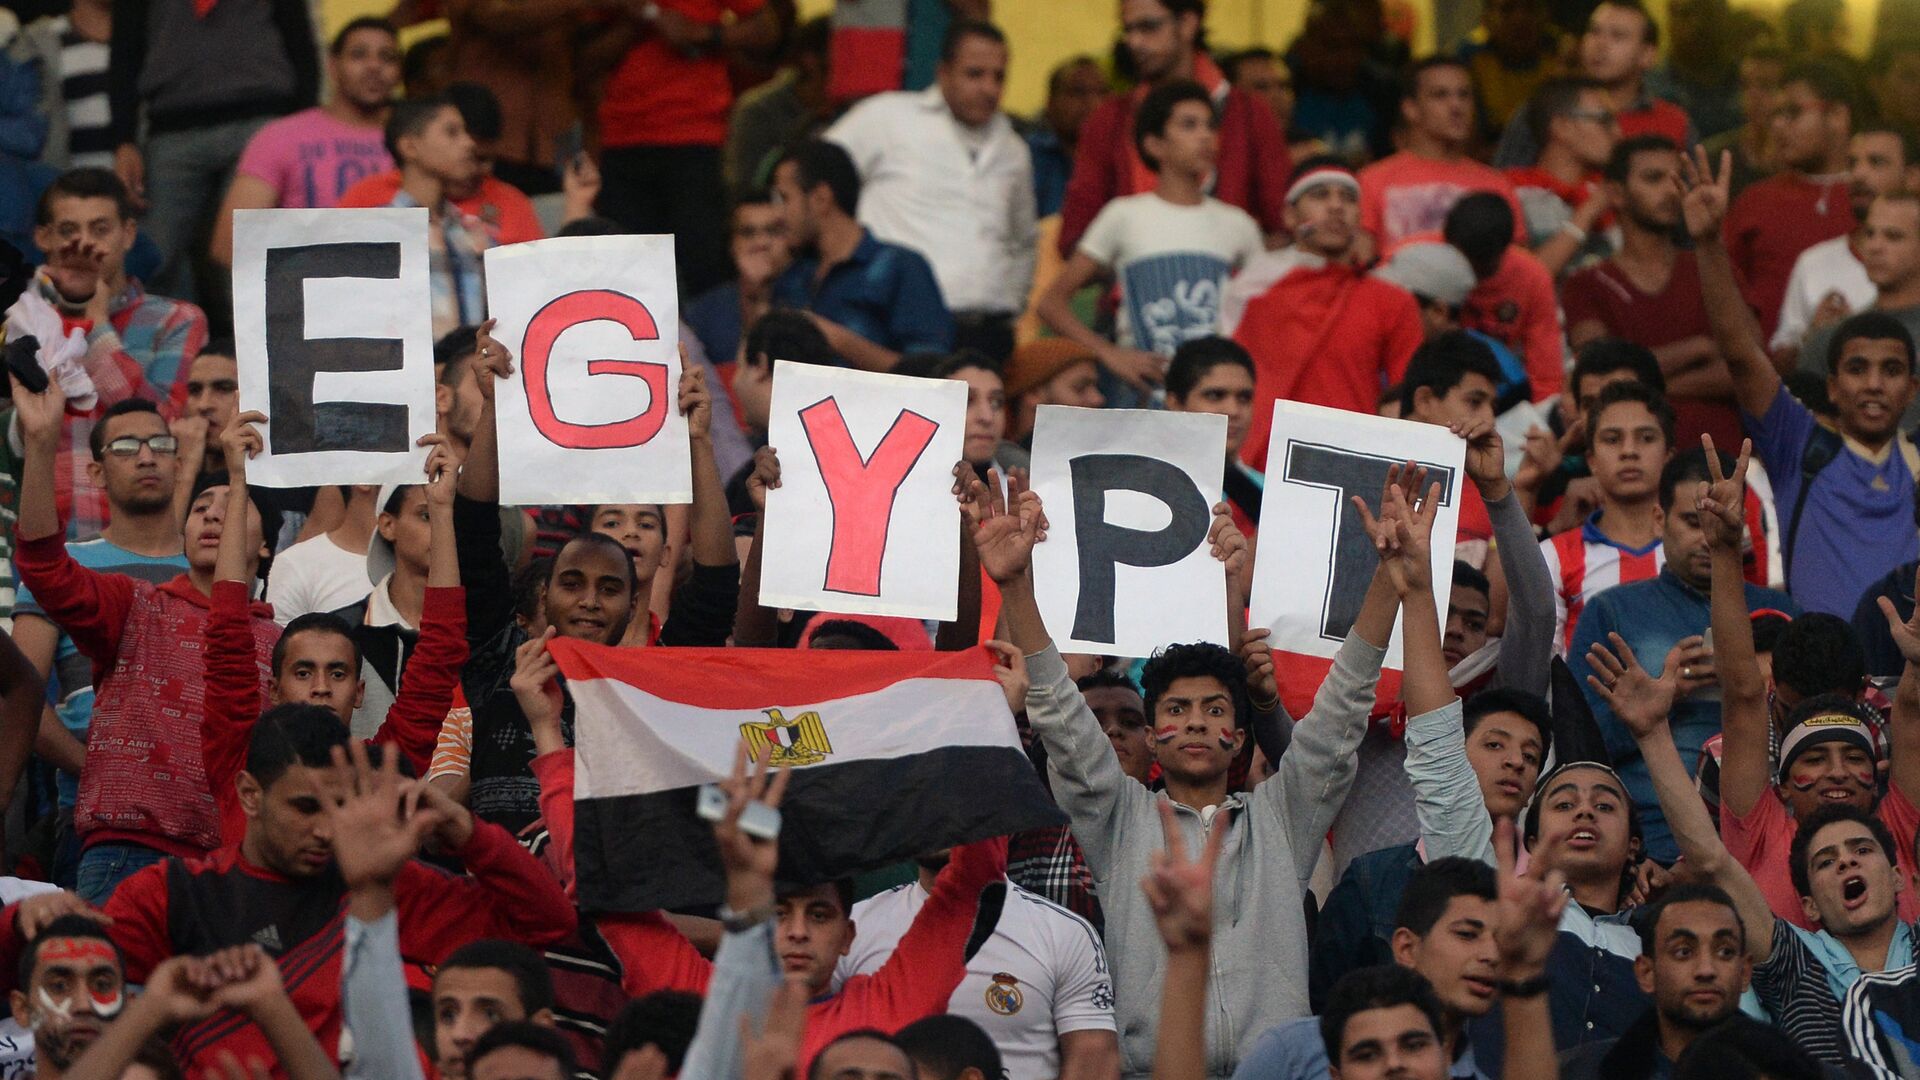 Egyptian fans carry placards and the national flag ahead of the match between Egypt and Senegal during the Africa Cup of Nations group G football match at the Cairo International Stadium in the Egyptian capital on November 15, 2014 - اسپوتنیک افغانستان  , 1920, 30.06.2022